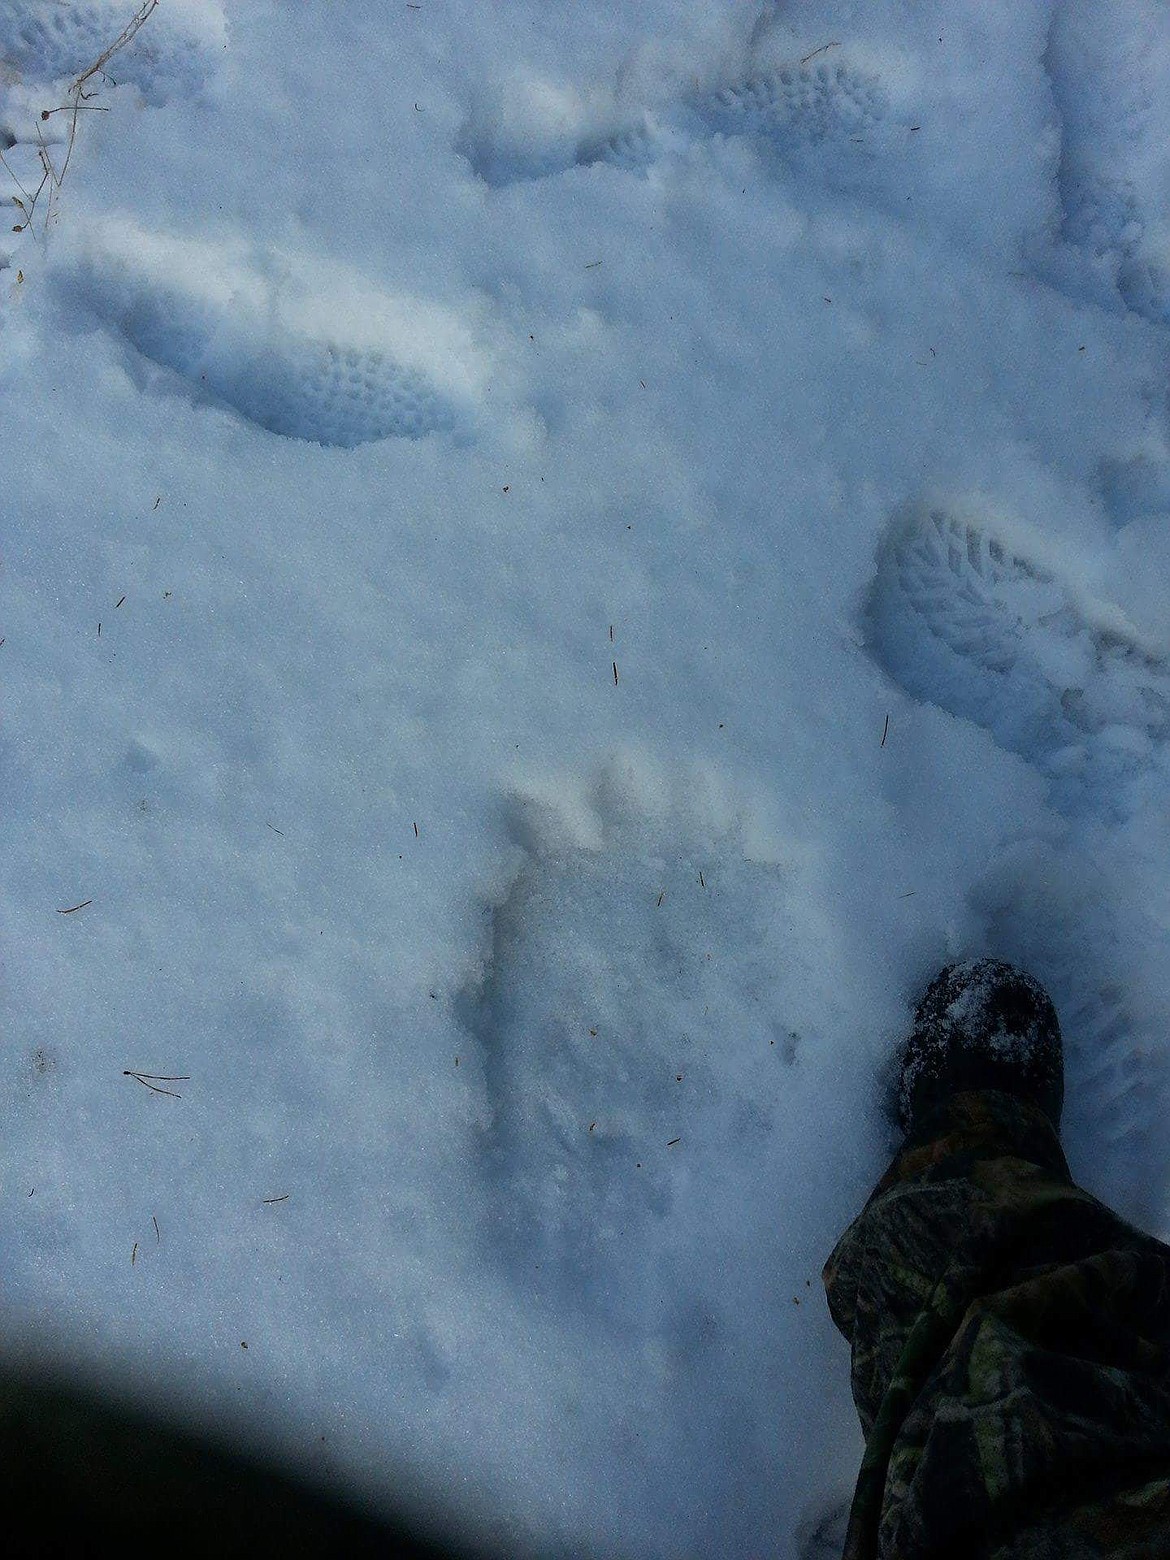 This photo was taken Jan. 16, 2014, in one of Misty Allabaugh&#146;s research areas in western Montana where she collects unusual hair samples and droppings in her ongoing search for Bigfoot.  (Photo courtesy of Misty Allabaugh)